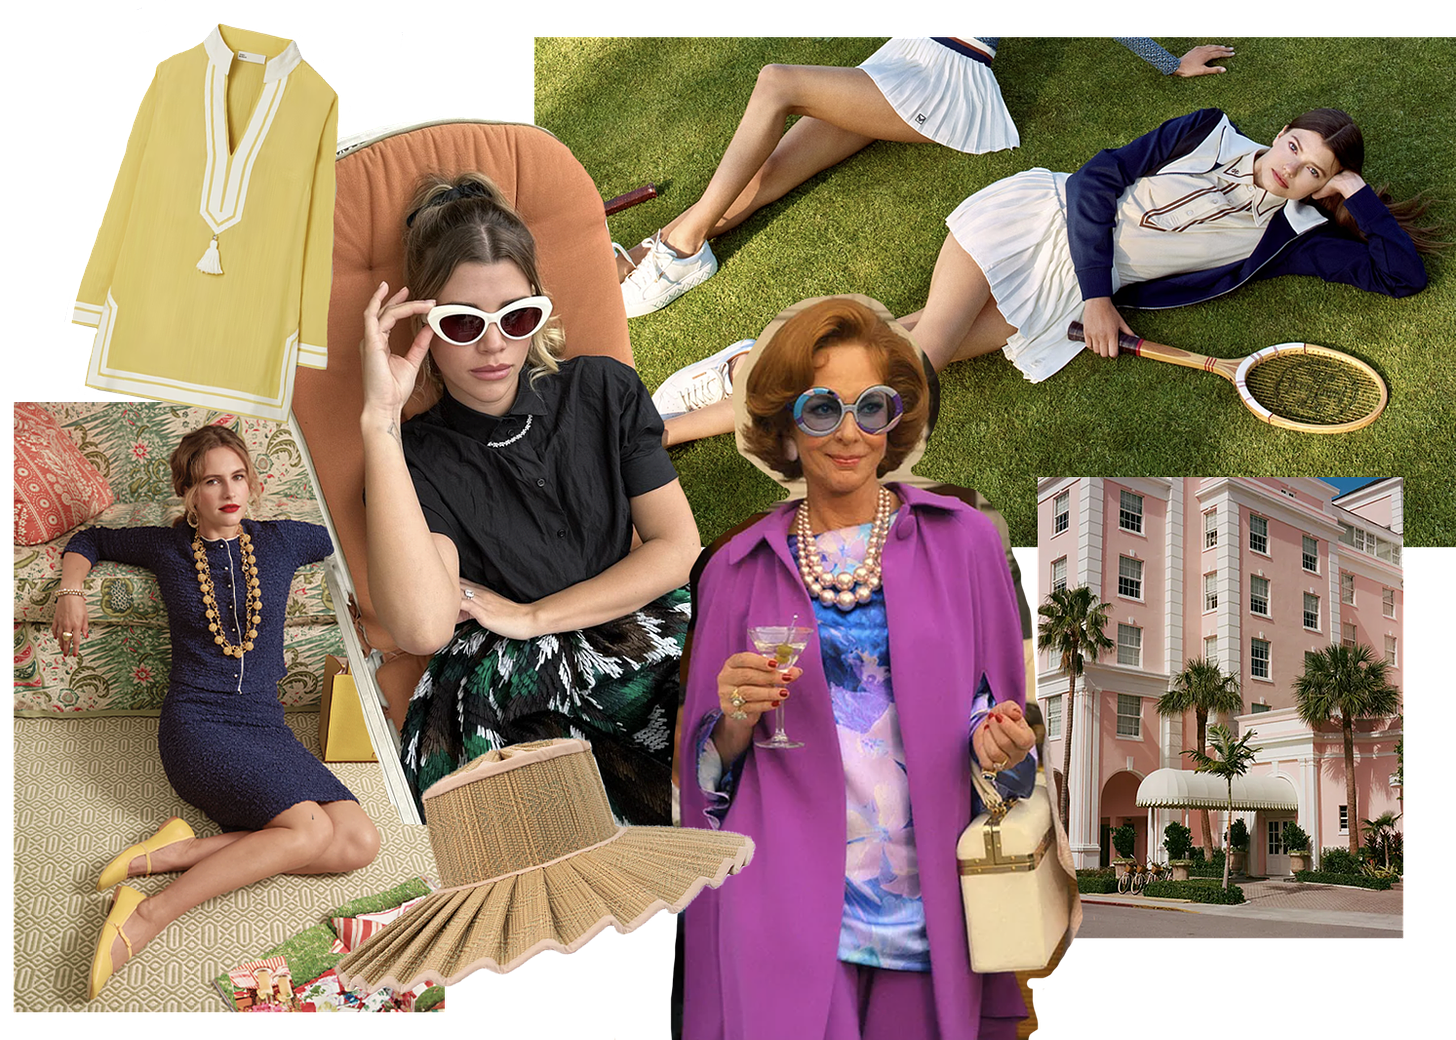 Collage of images with a Palm Beach aesthetic